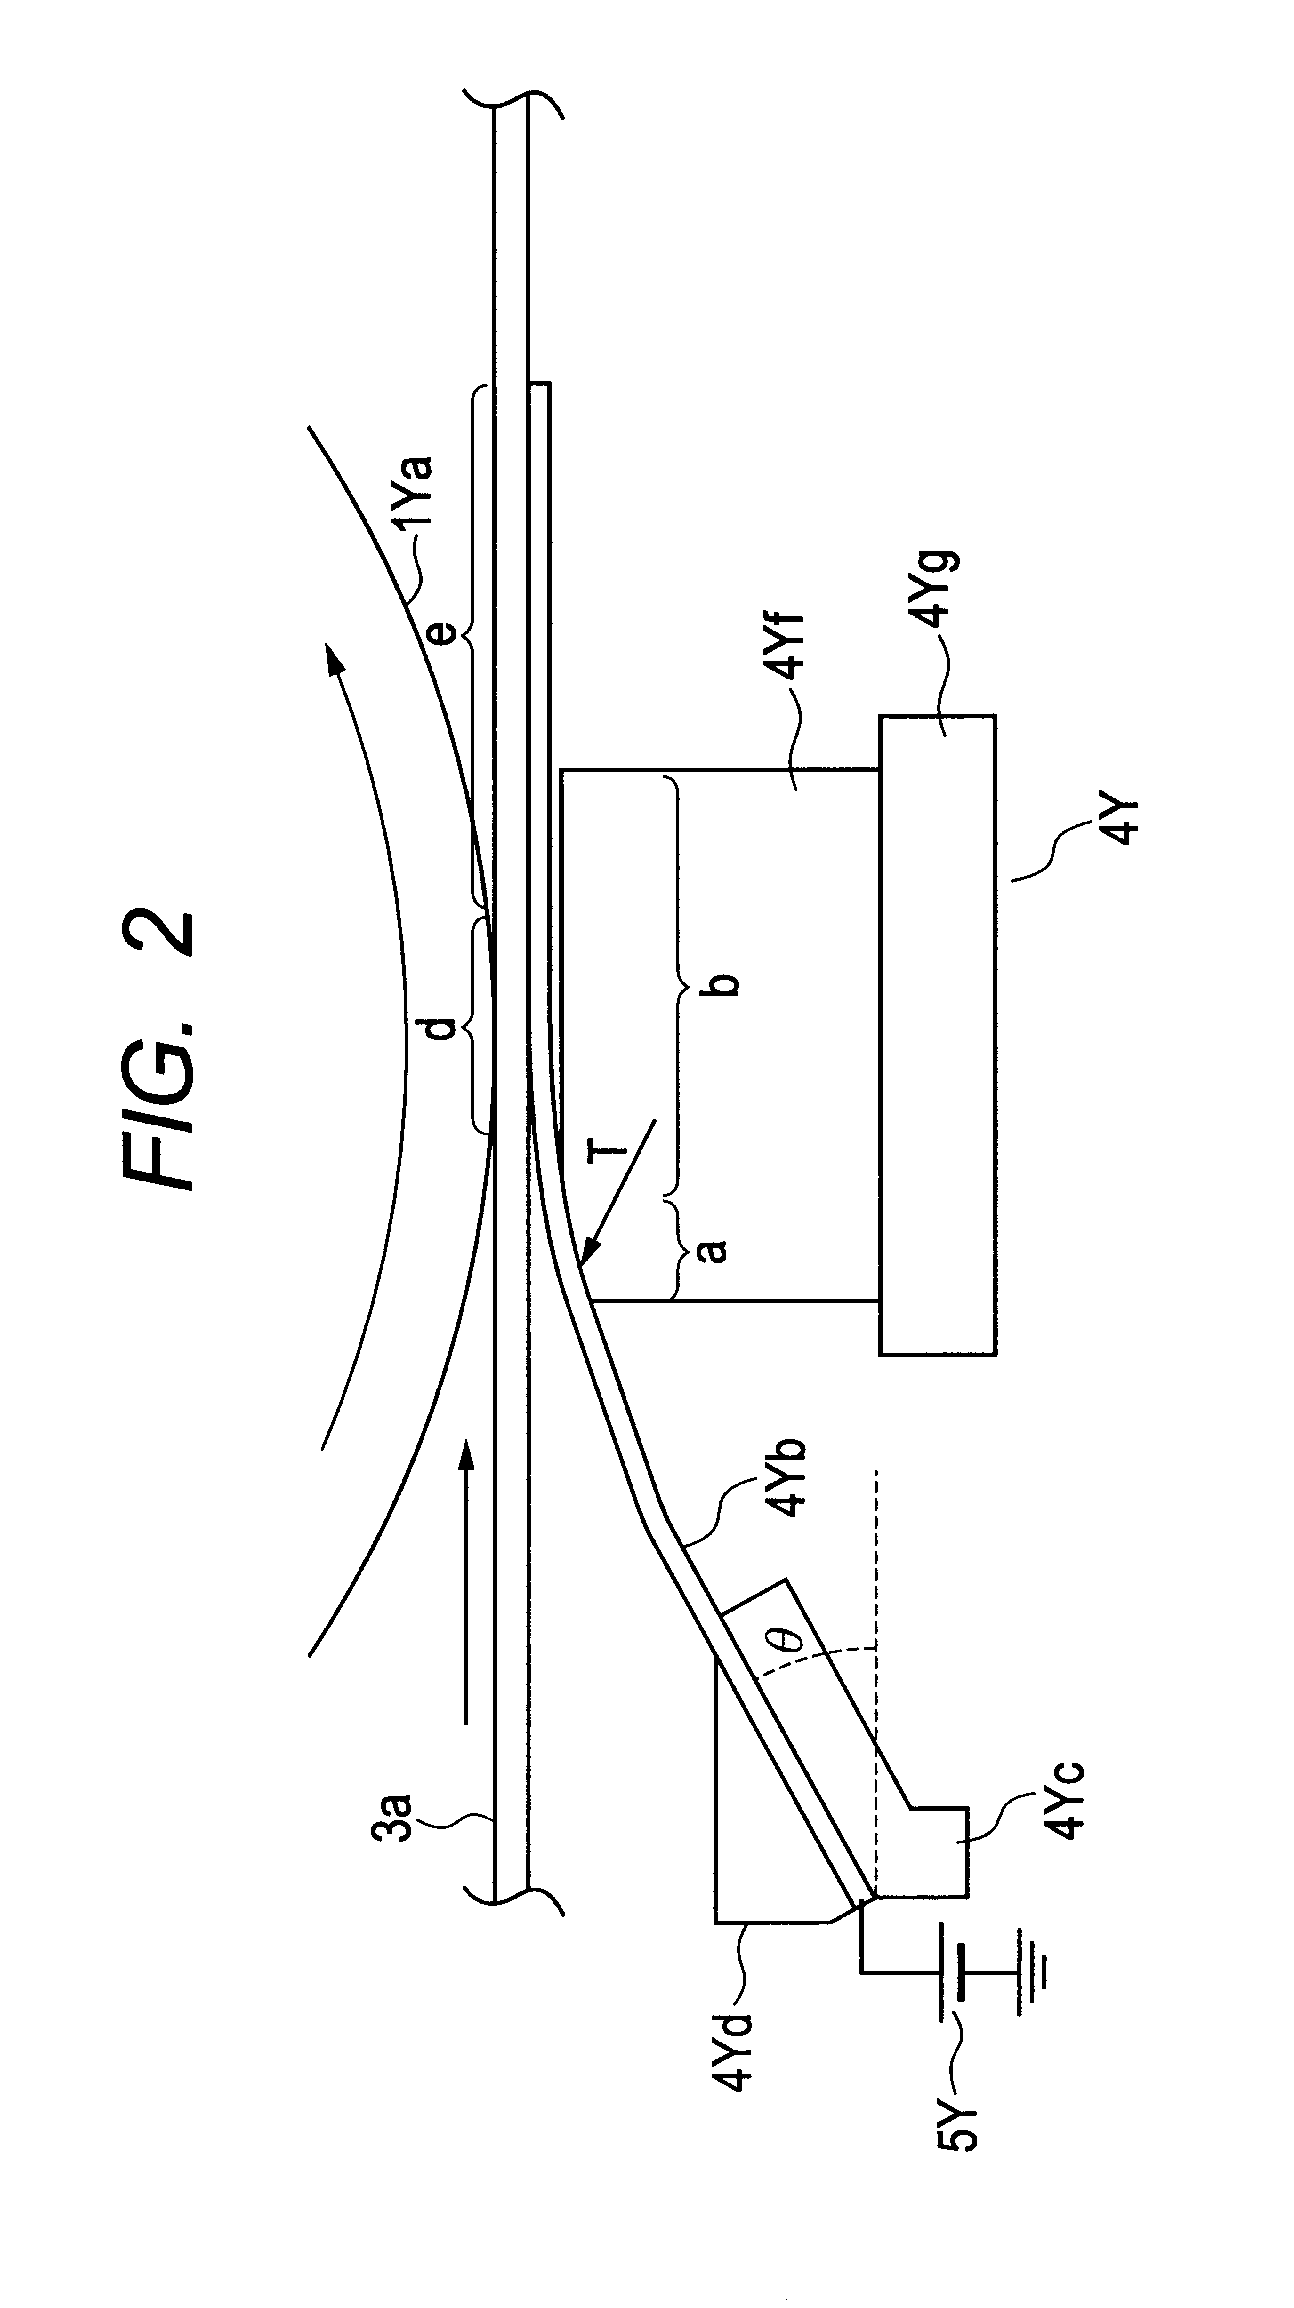 Image forming apparatus with movable pressing member